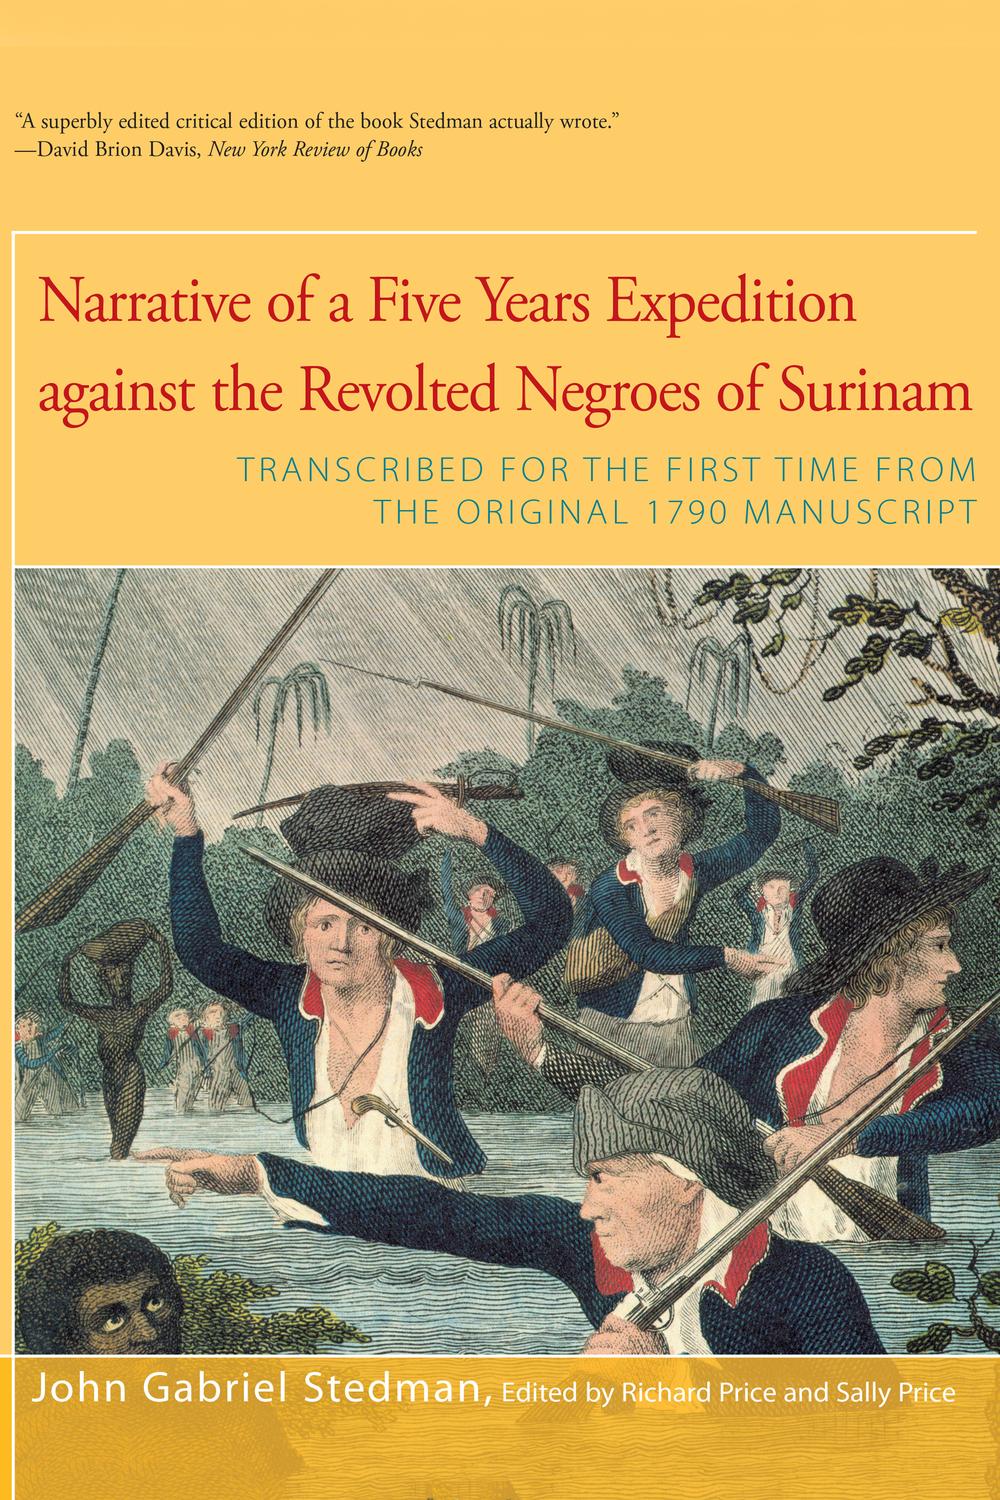 Narrative of Five Years Expedition Against the Revolted Negroes of Surinam - John Gabriel Stedman,Richard Price, Sally Price,Richard Price, Sally Price